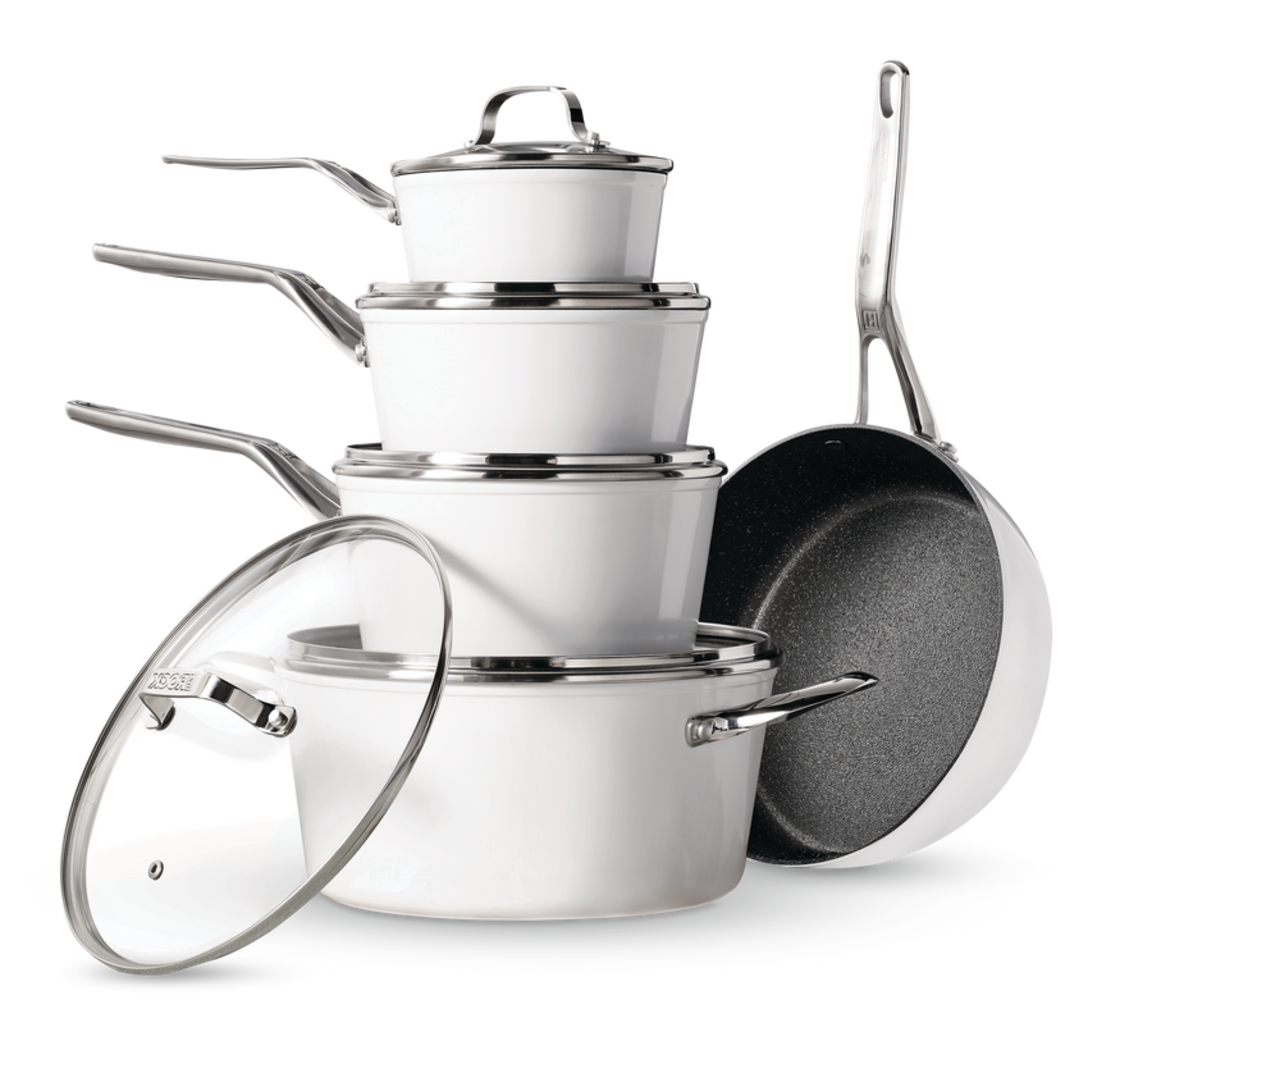 https://media-www.canadiantire.ca/product/living/kitchen/cookware/1429100/heritage-the-rock-ceramic-zero-10-piece-cookset-7b7665f5-ca38-4b27-93ce-28c4a468be74.png?imdensity=1&imwidth=1244&impolicy=mZoom